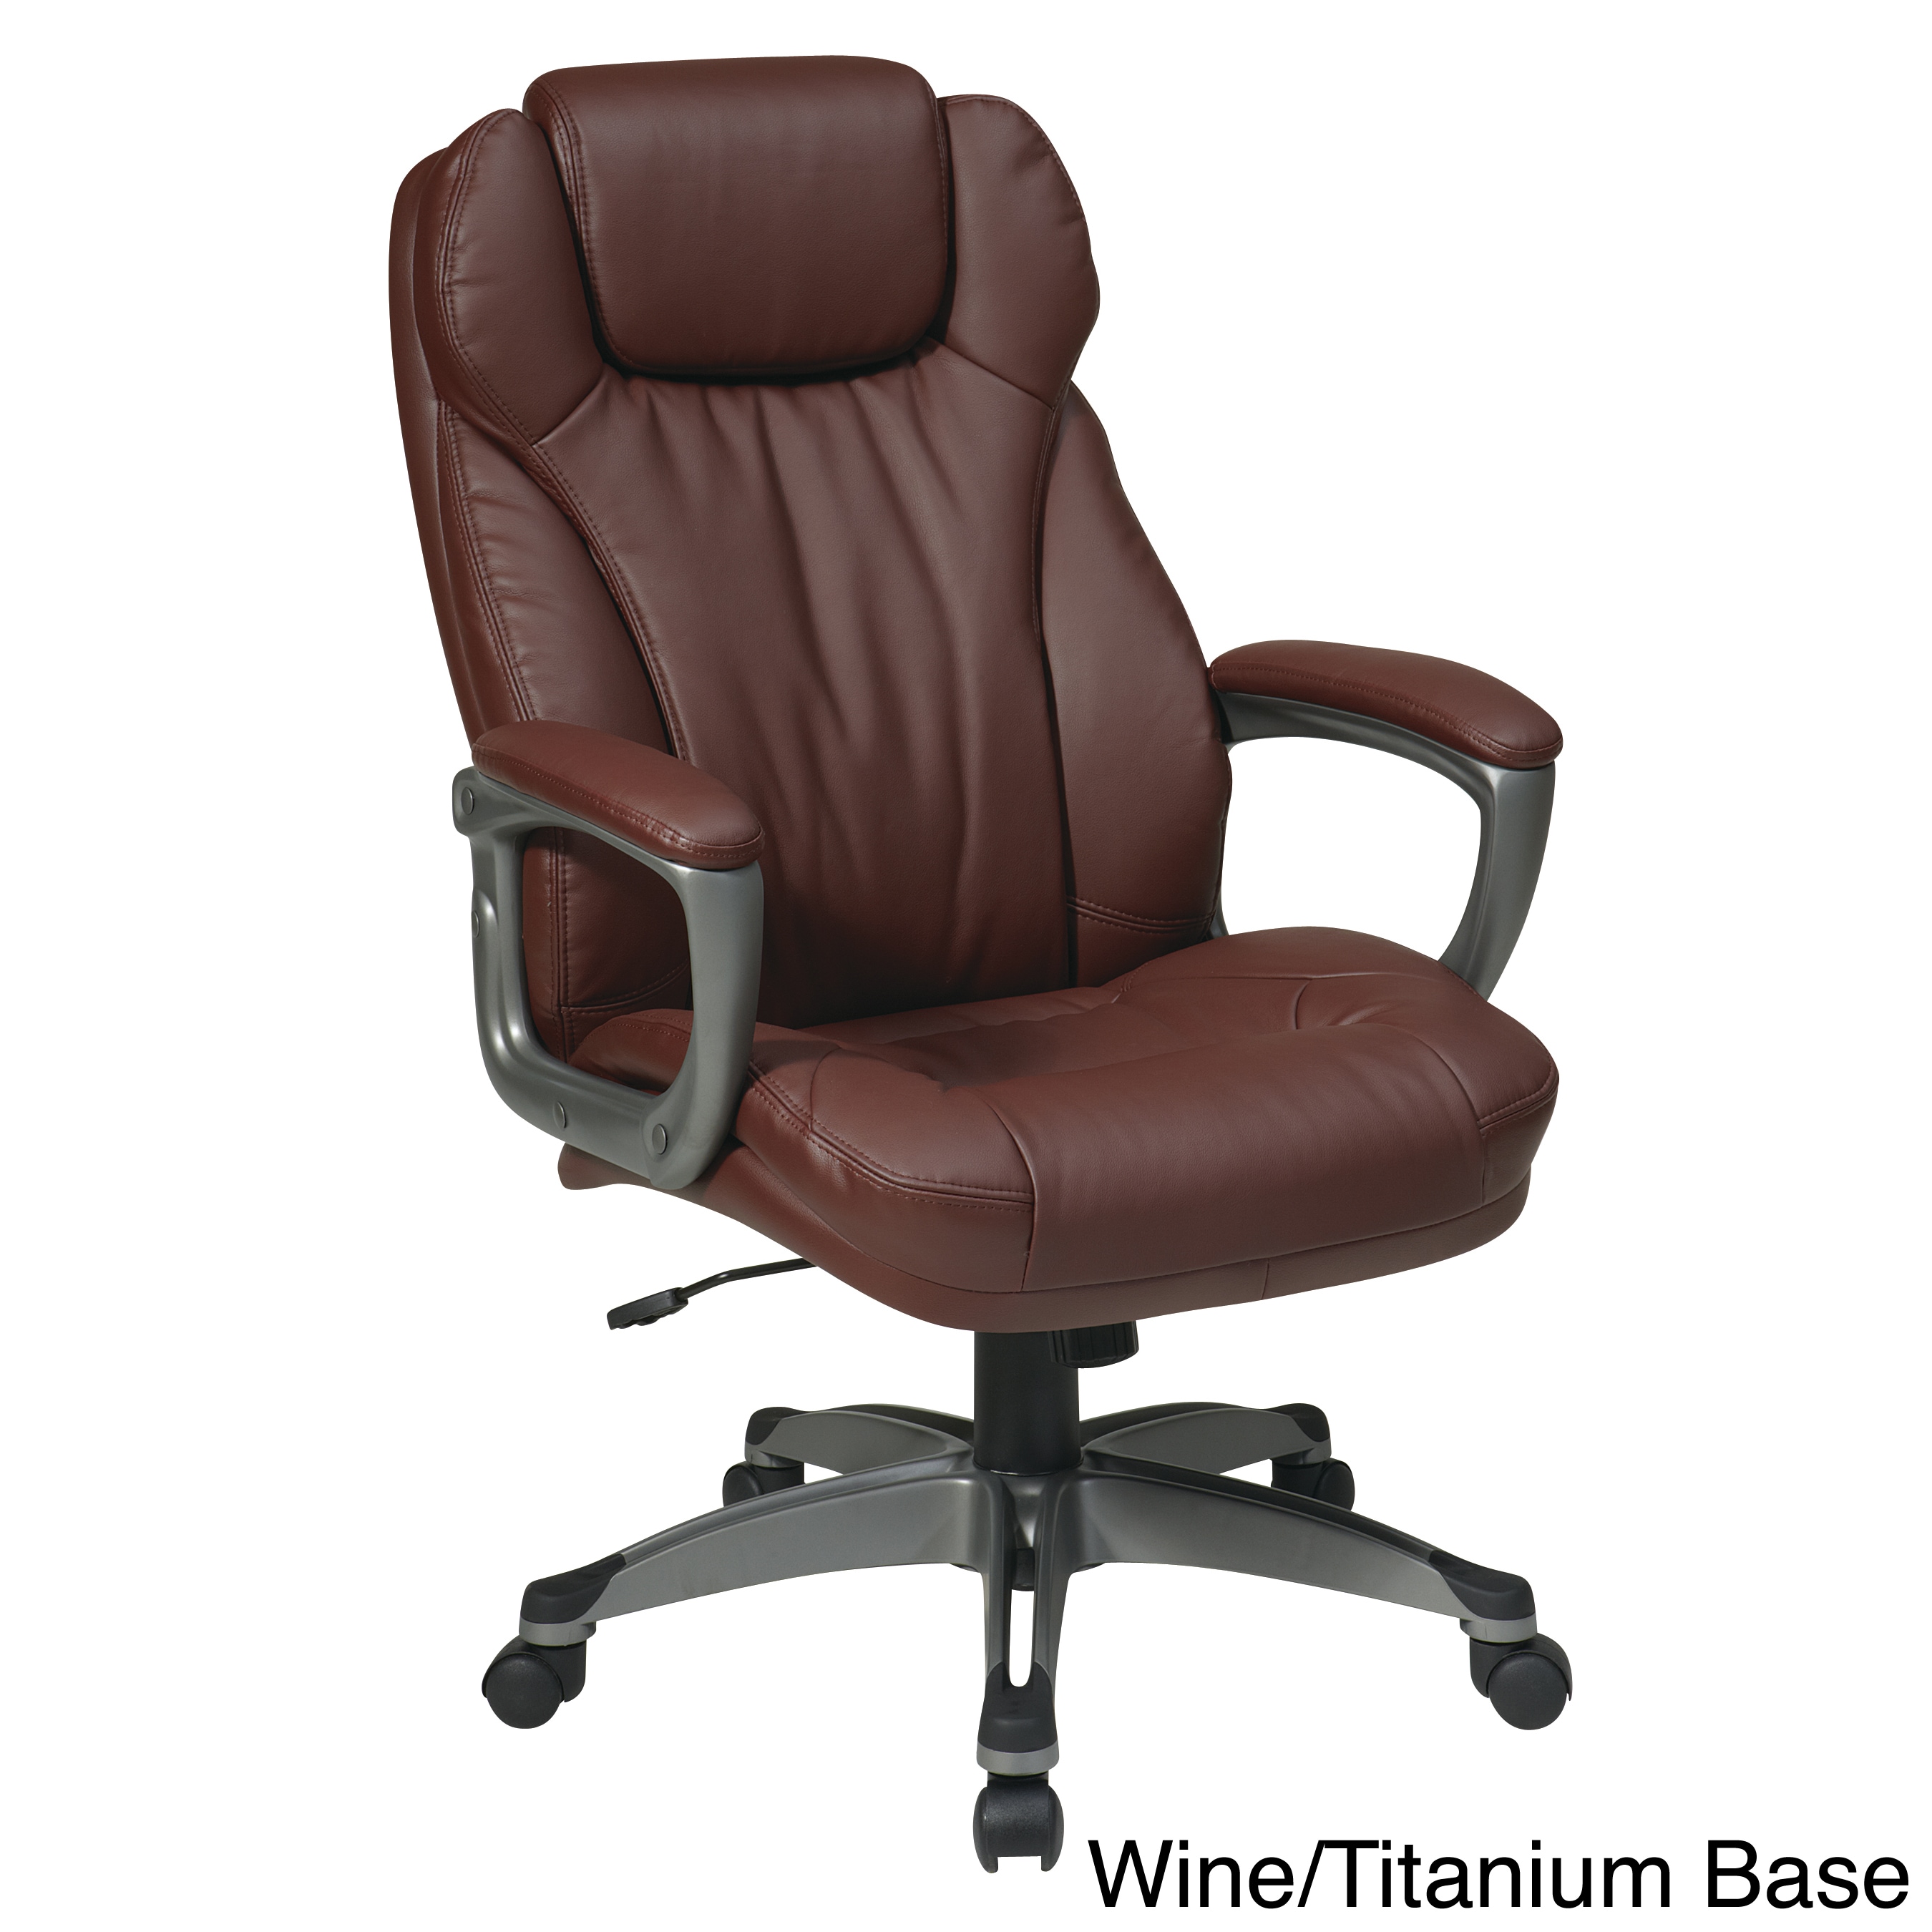 Office Star Products Work Smart Eco Leather Seat And Back Executive Chair Model Ech8580 (Black, espresso, wineWeight capacity 250 poundsDimensions 48.5 inches high x 27 inches wide x 29.5 inches deepSeat dimensions 21.5 inches wide x 19 inches deep x 4